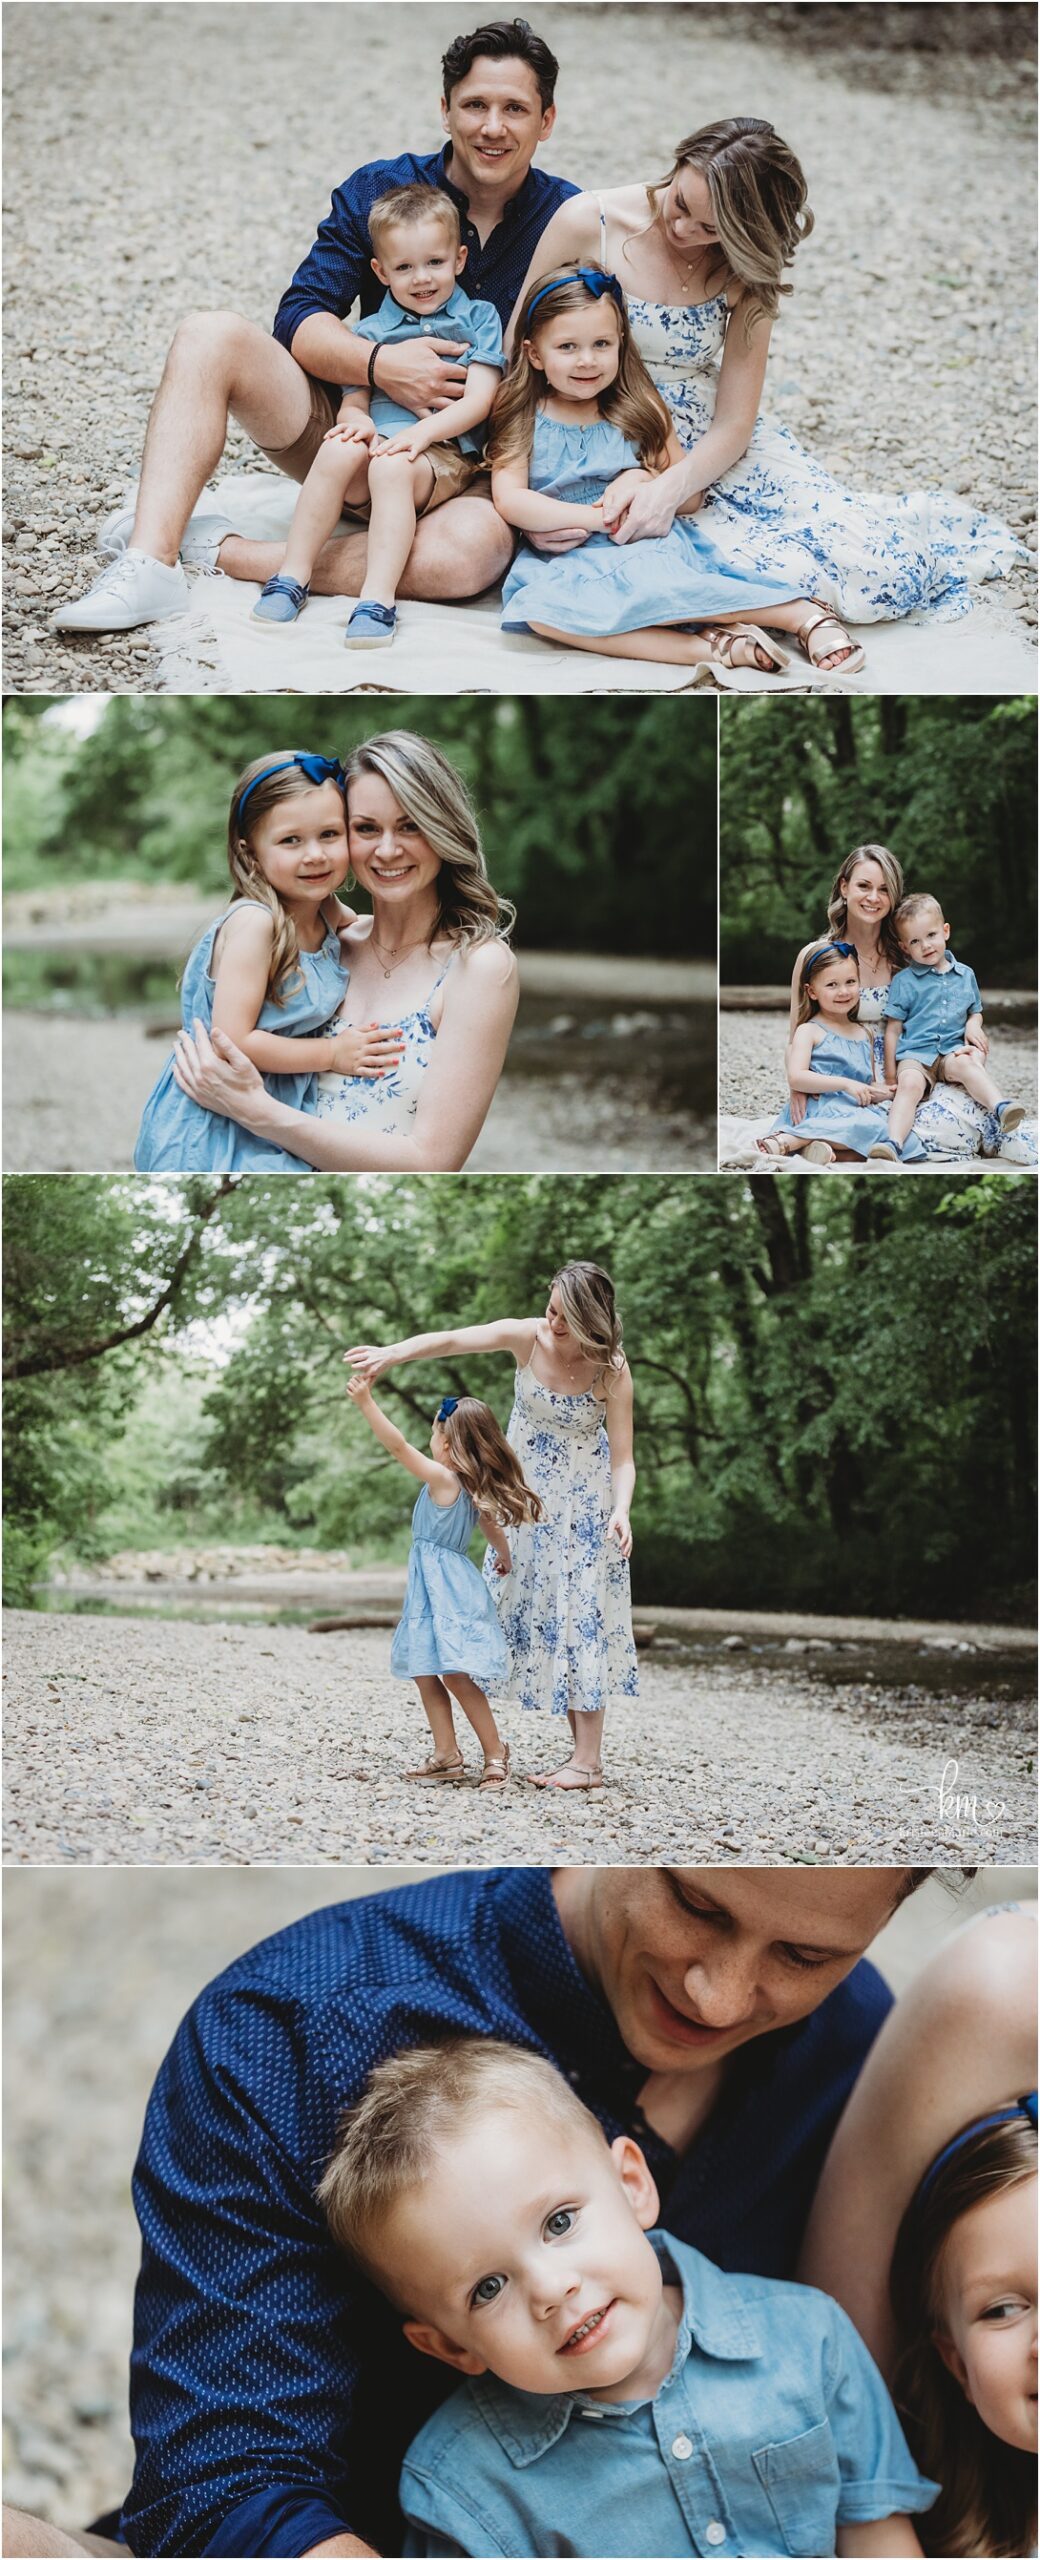 Mom with her kids - Indianapolis creek side photography session